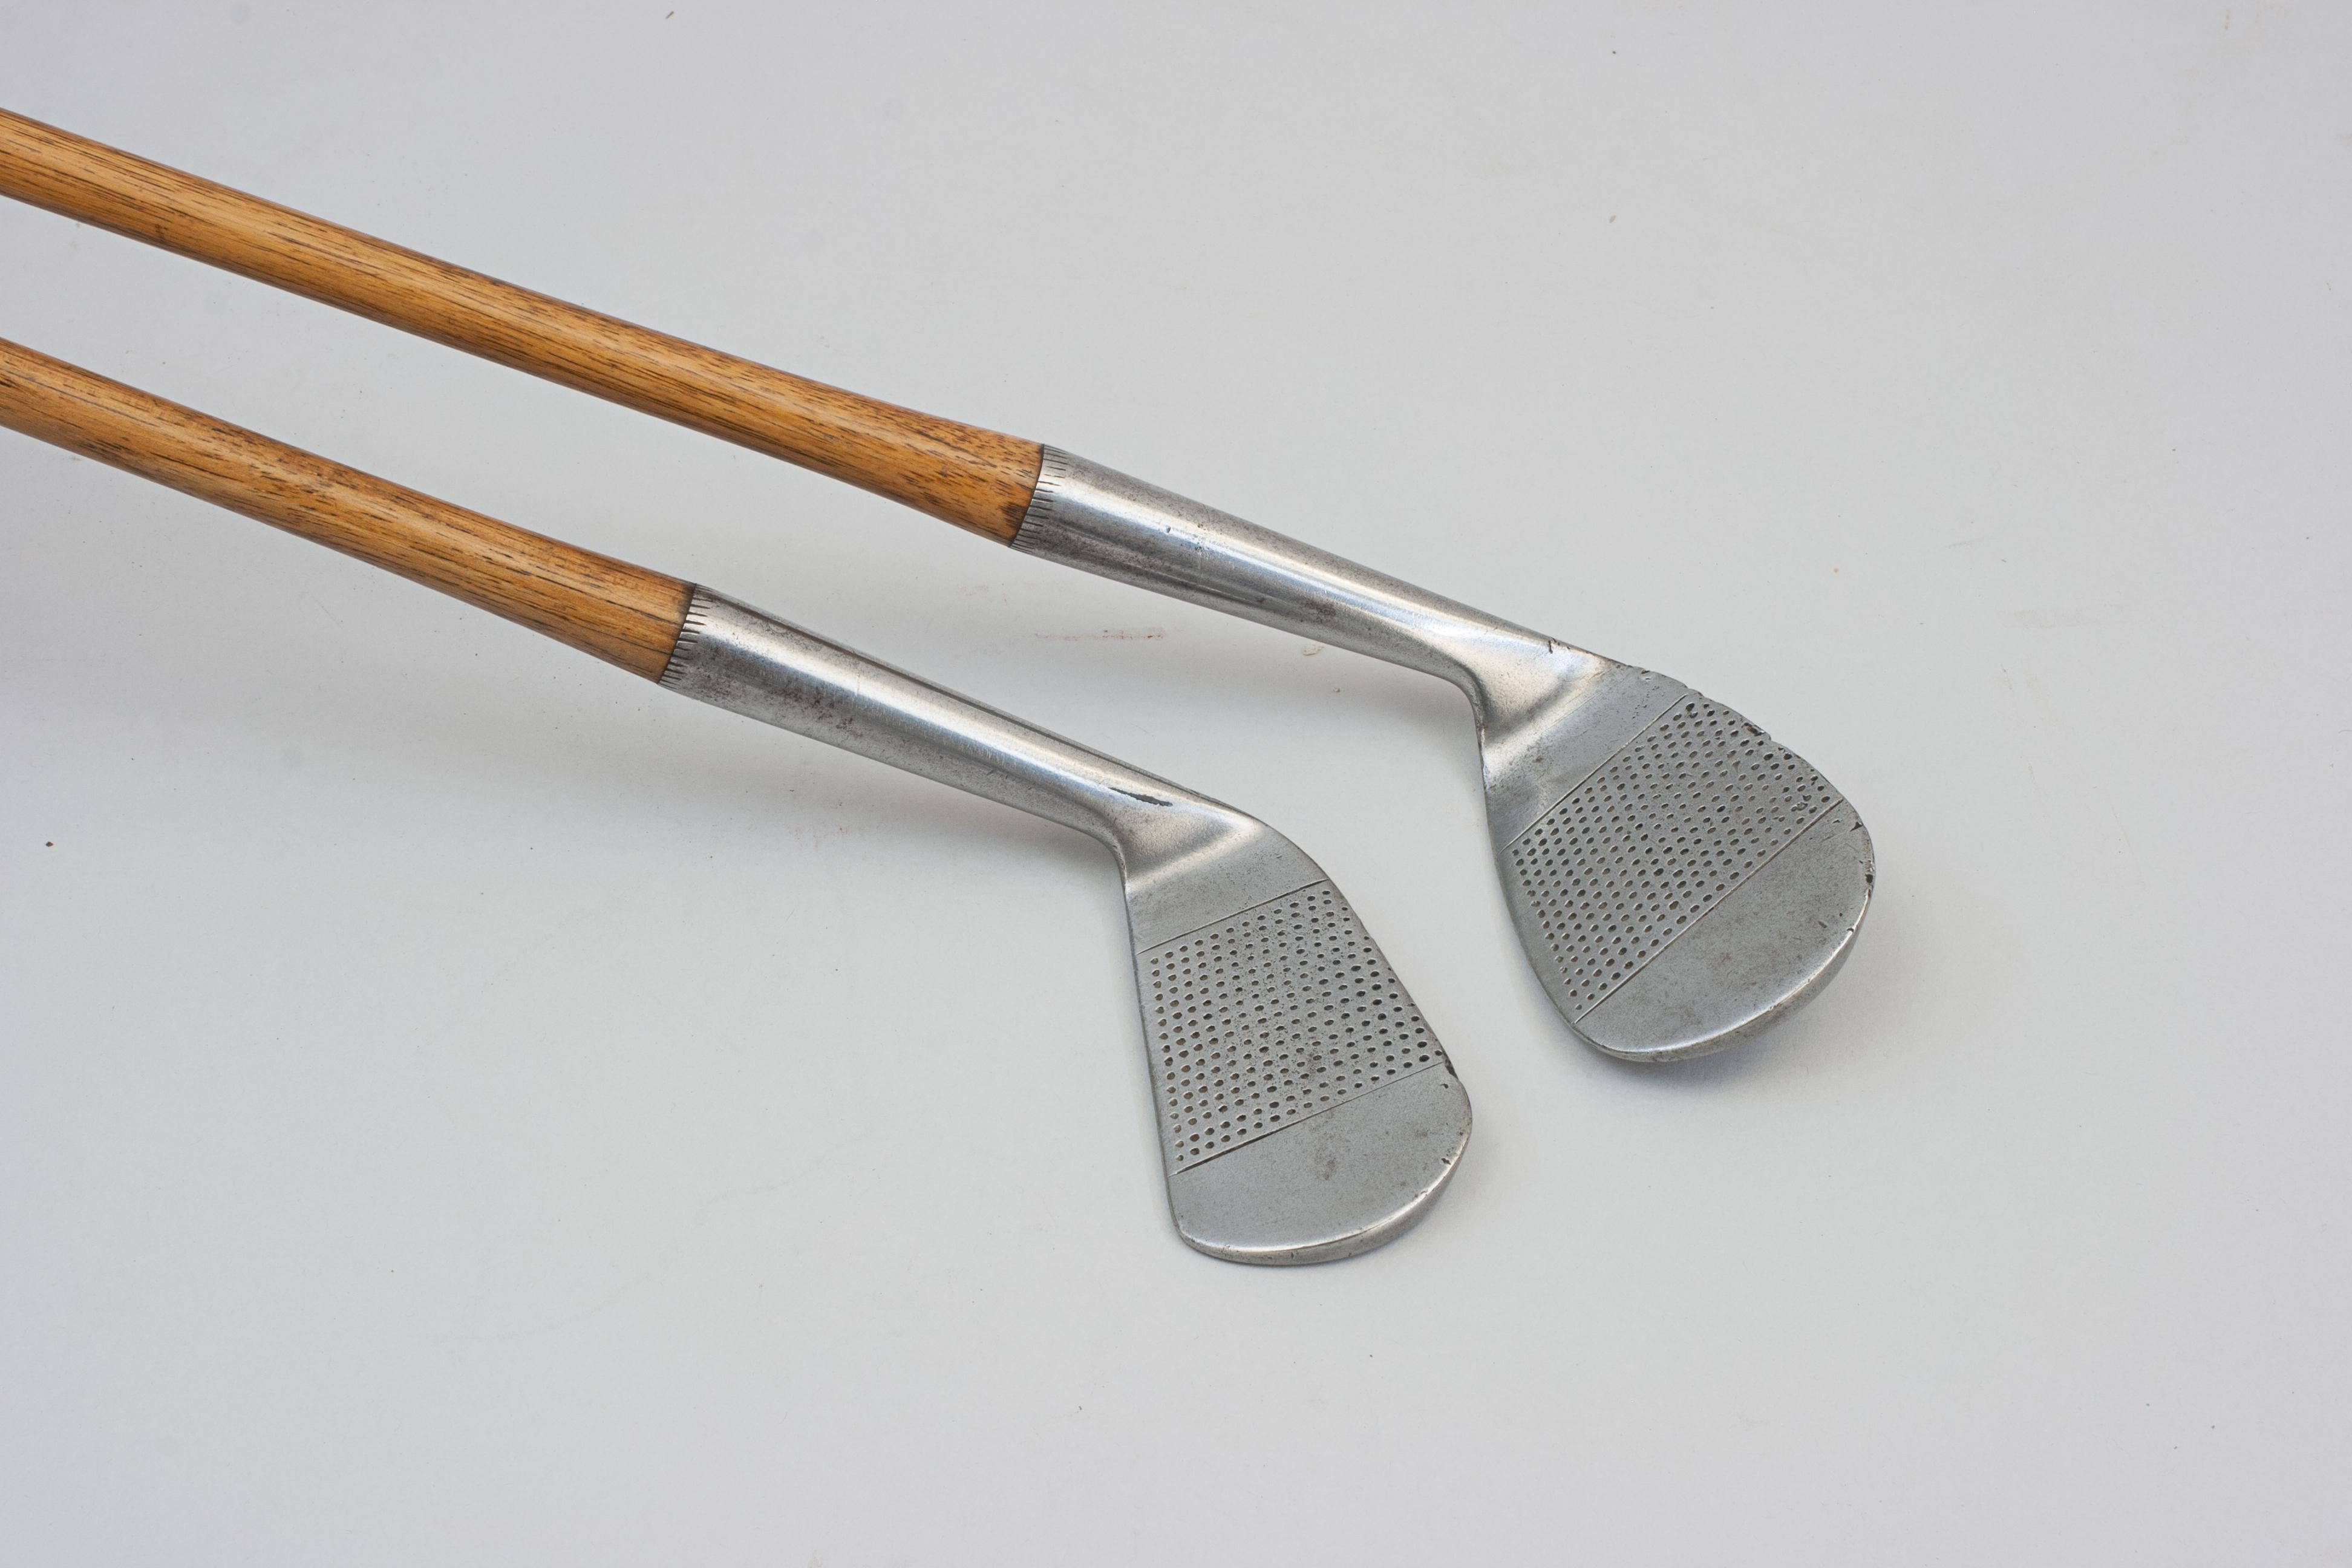 Steel Pair of Golf Clubs by R. Forgan. Scotia, Mashie and Niblick